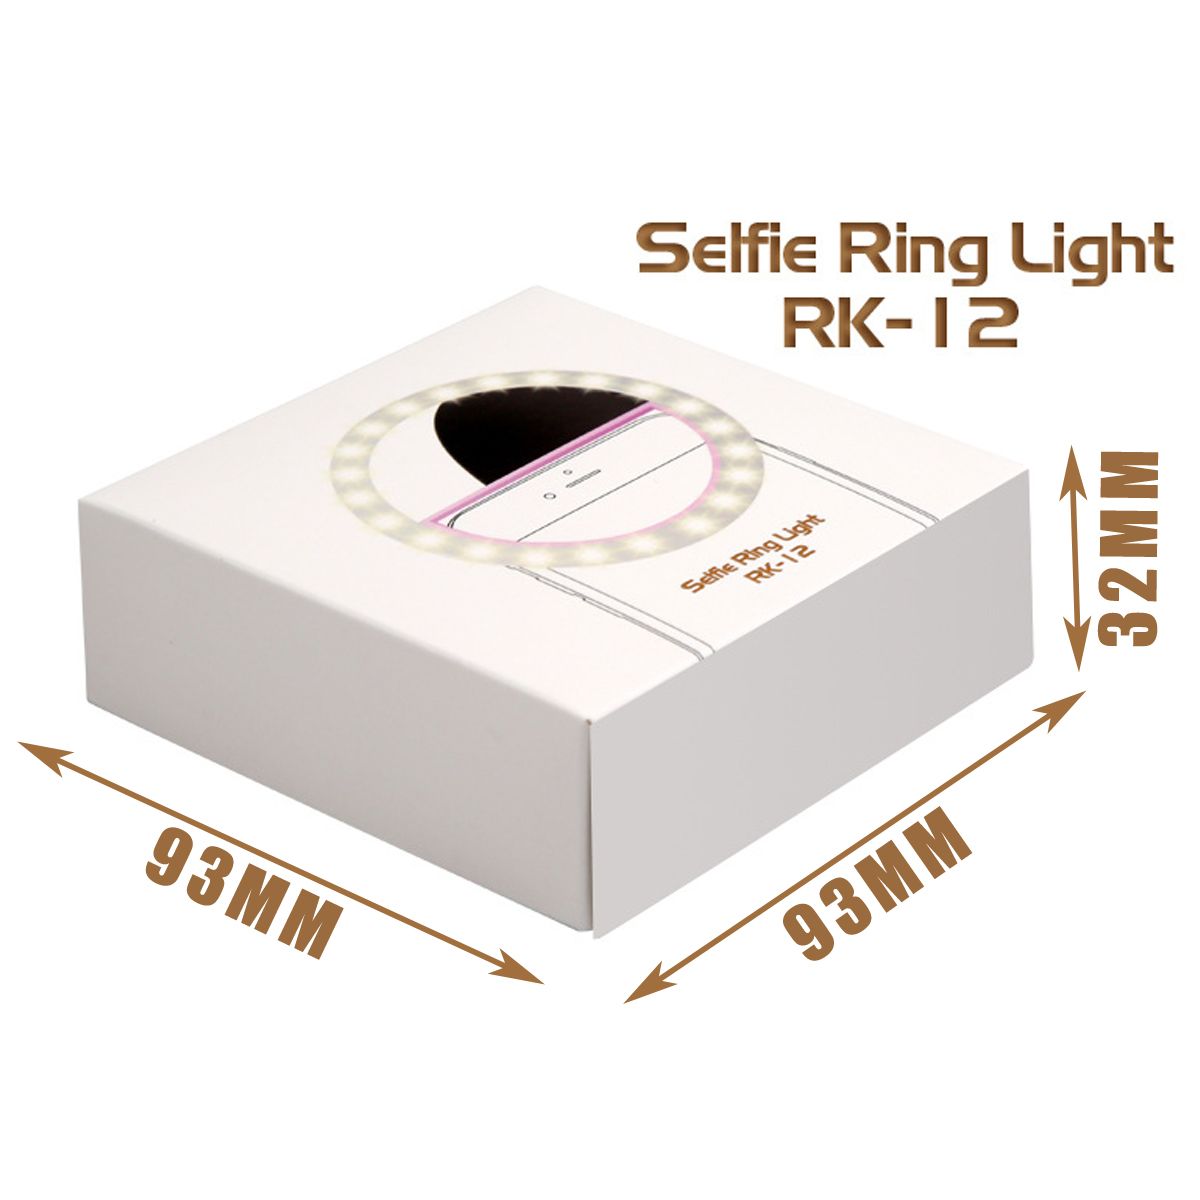 Selfie-36-USB-LED-Light-Ring-Flash-Fill-Clip-Camera-for-iPhone-for-Samsung-Mobile-Phone-1328181